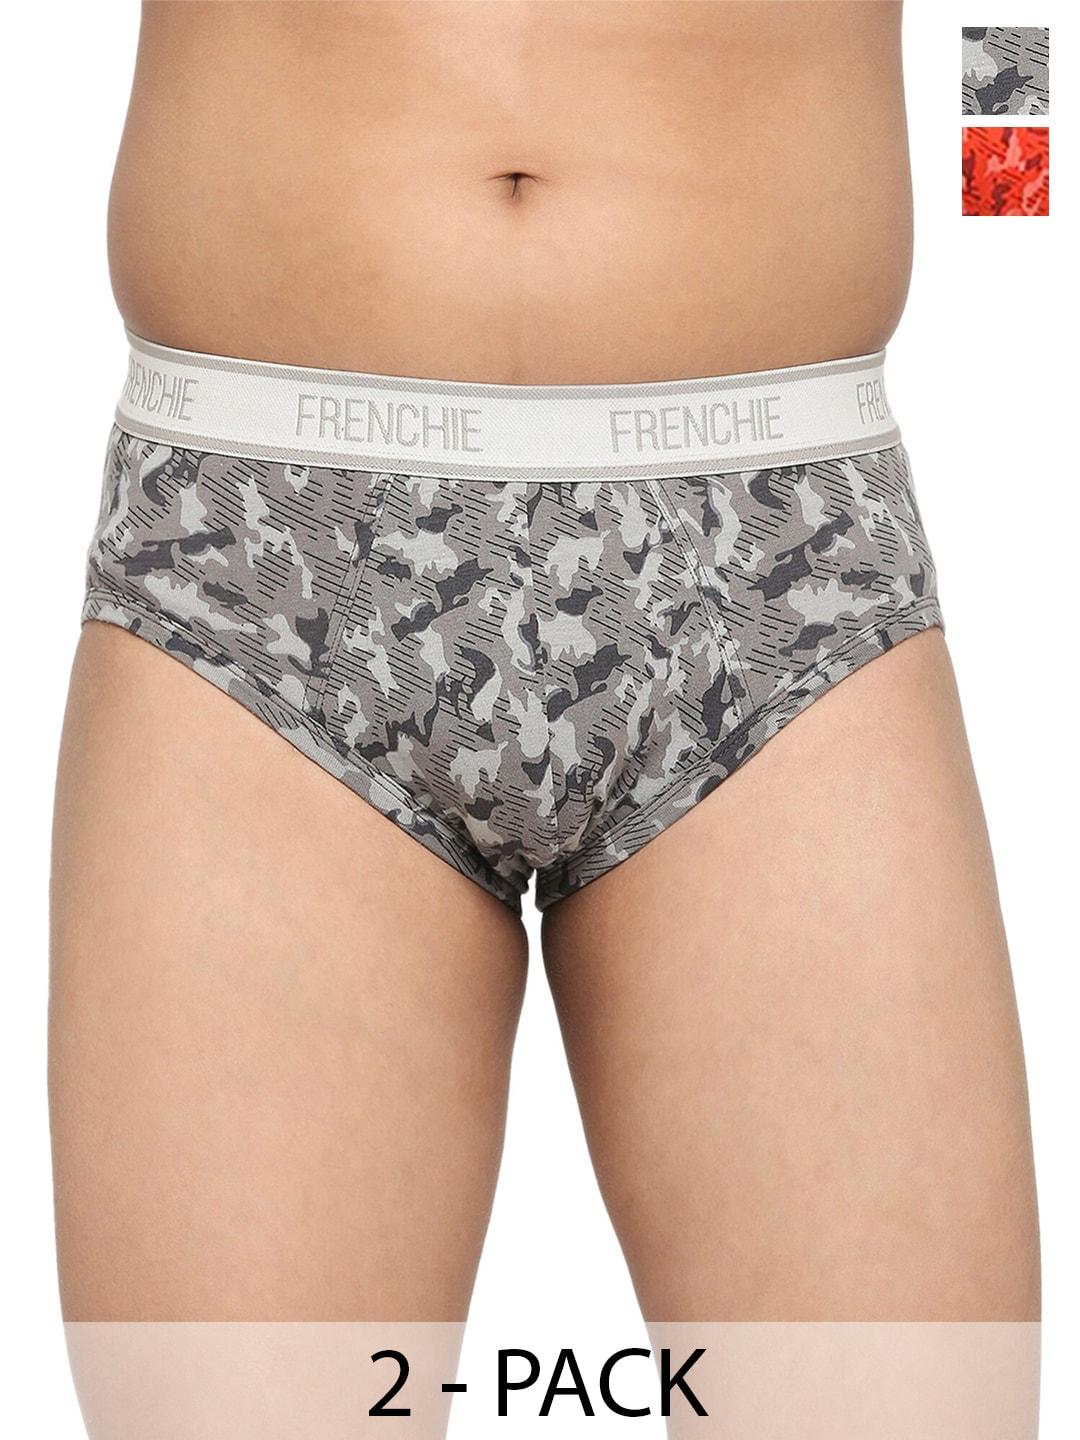 frenchie boys pack of 2 abstract printed cotton briefs fr-bf-u1904-1x5-red-gray-xs